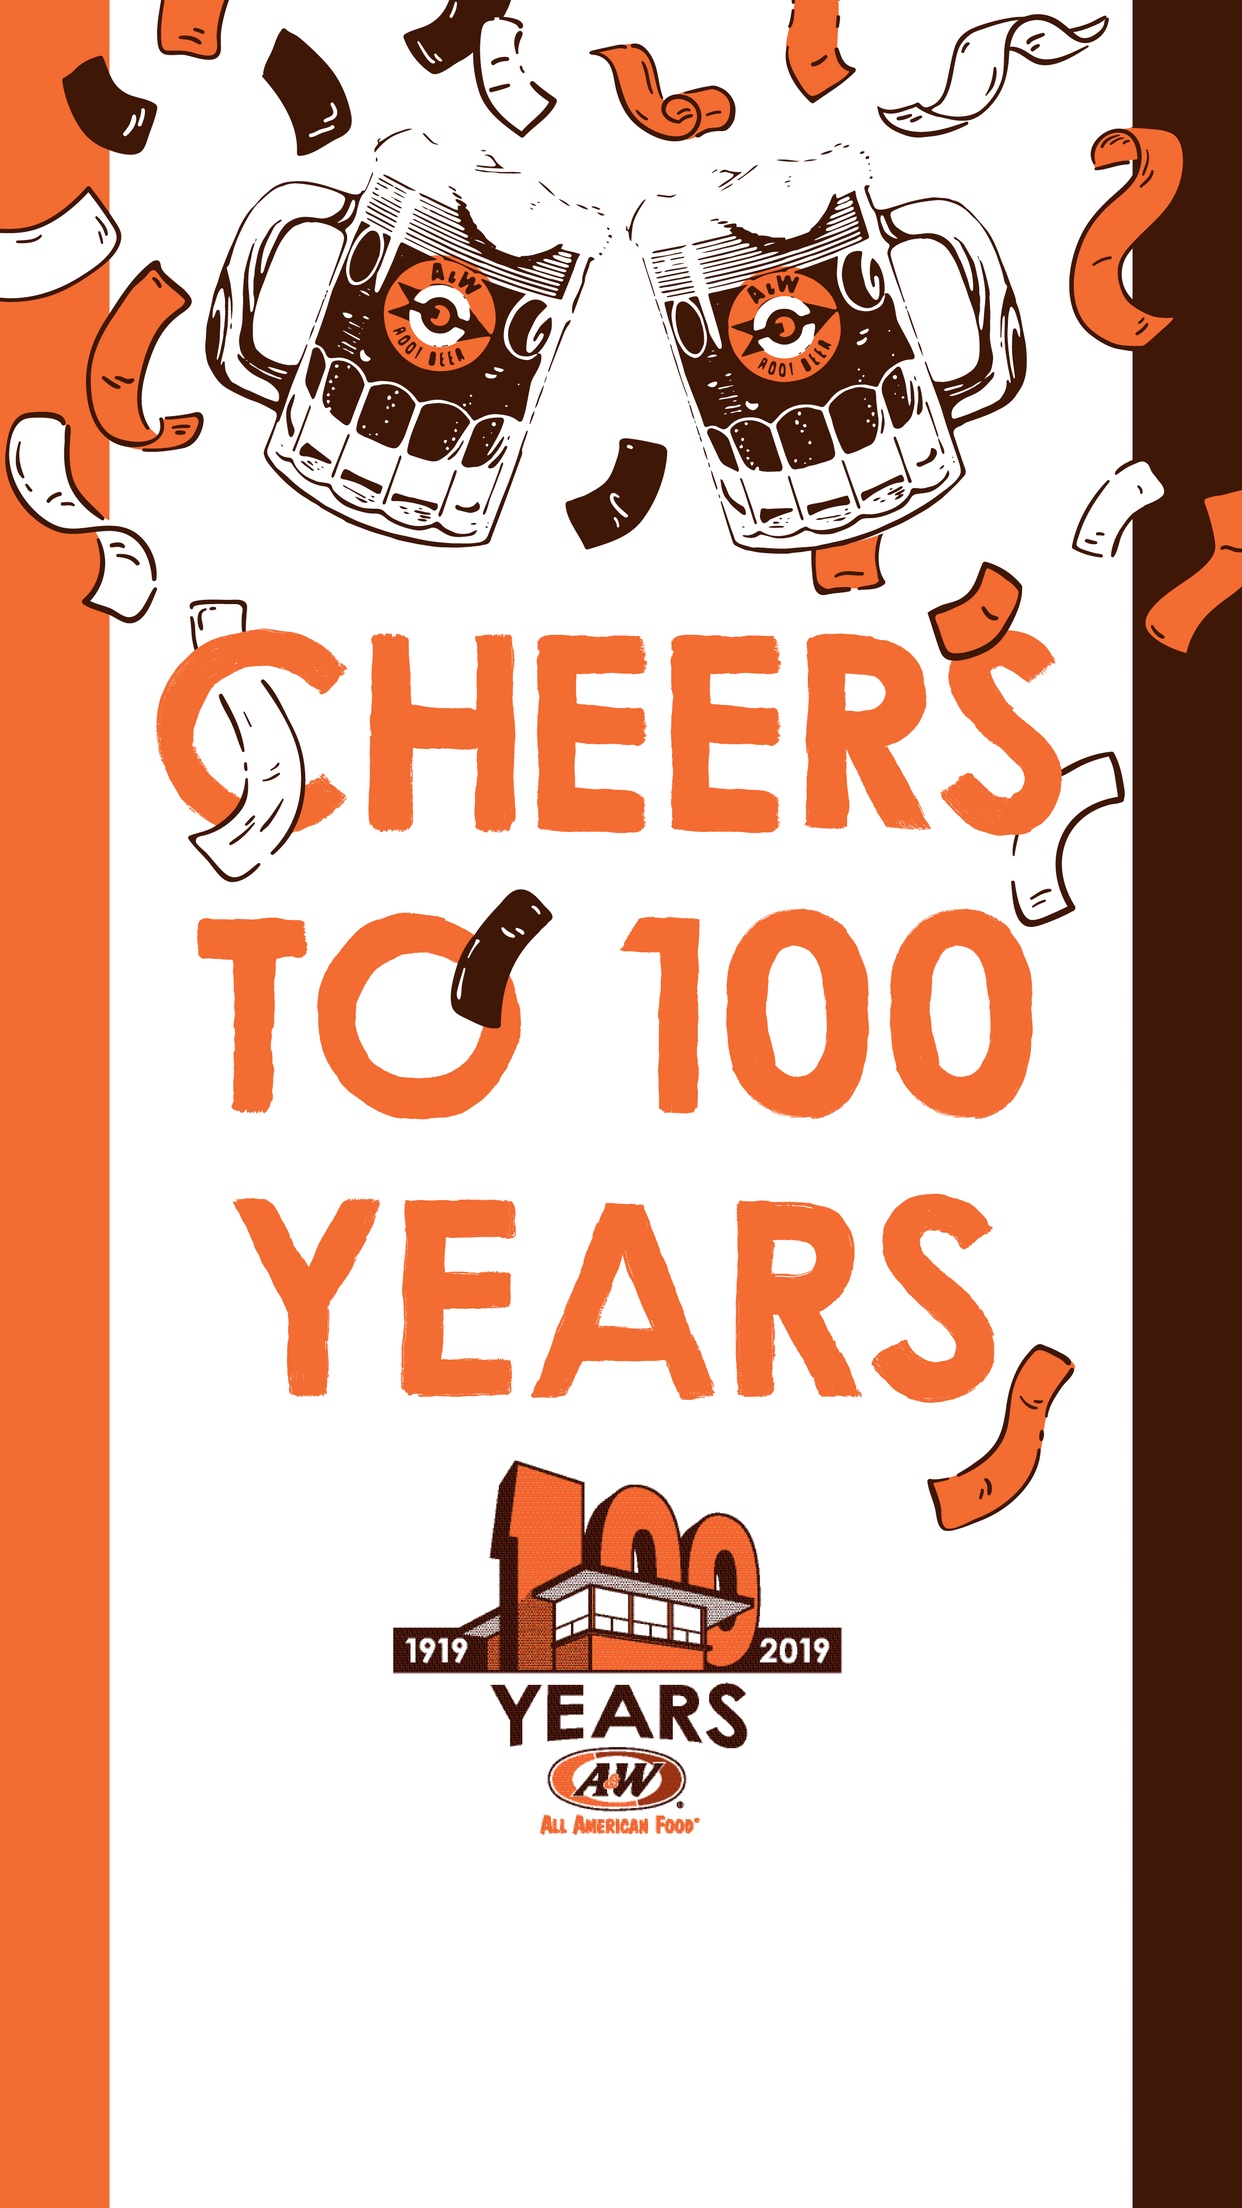 White background with orange on left side, brown on right side. Two A&W Root Beer mugs clinking together with 'Cheers to 100 Years' text and A&W Restaurants logo